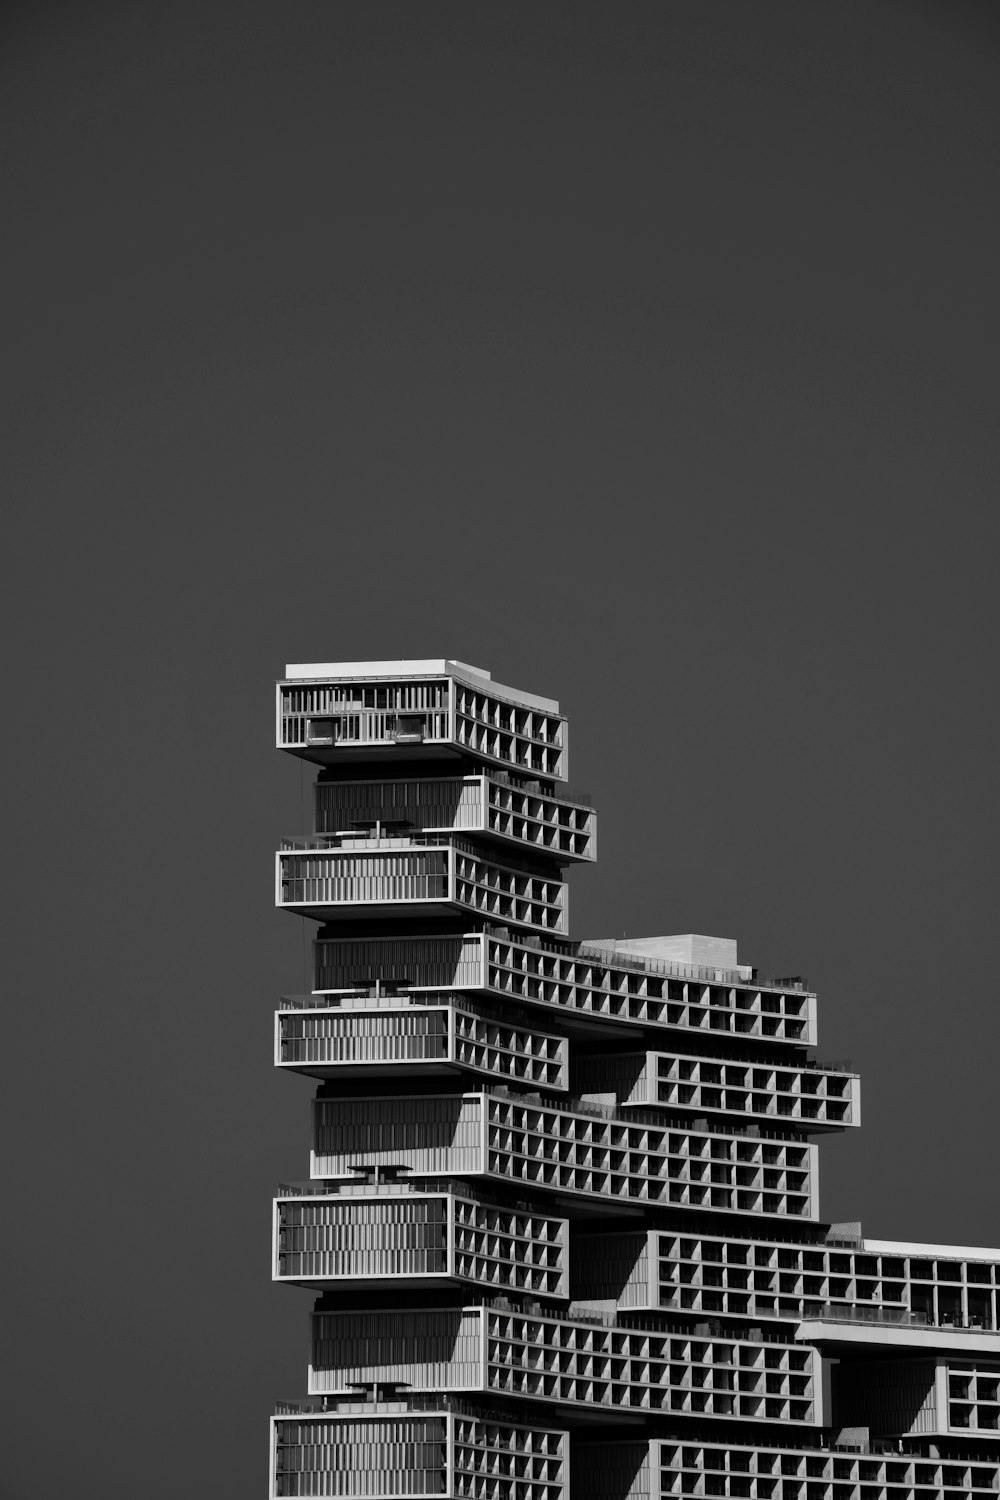 a building with balconies